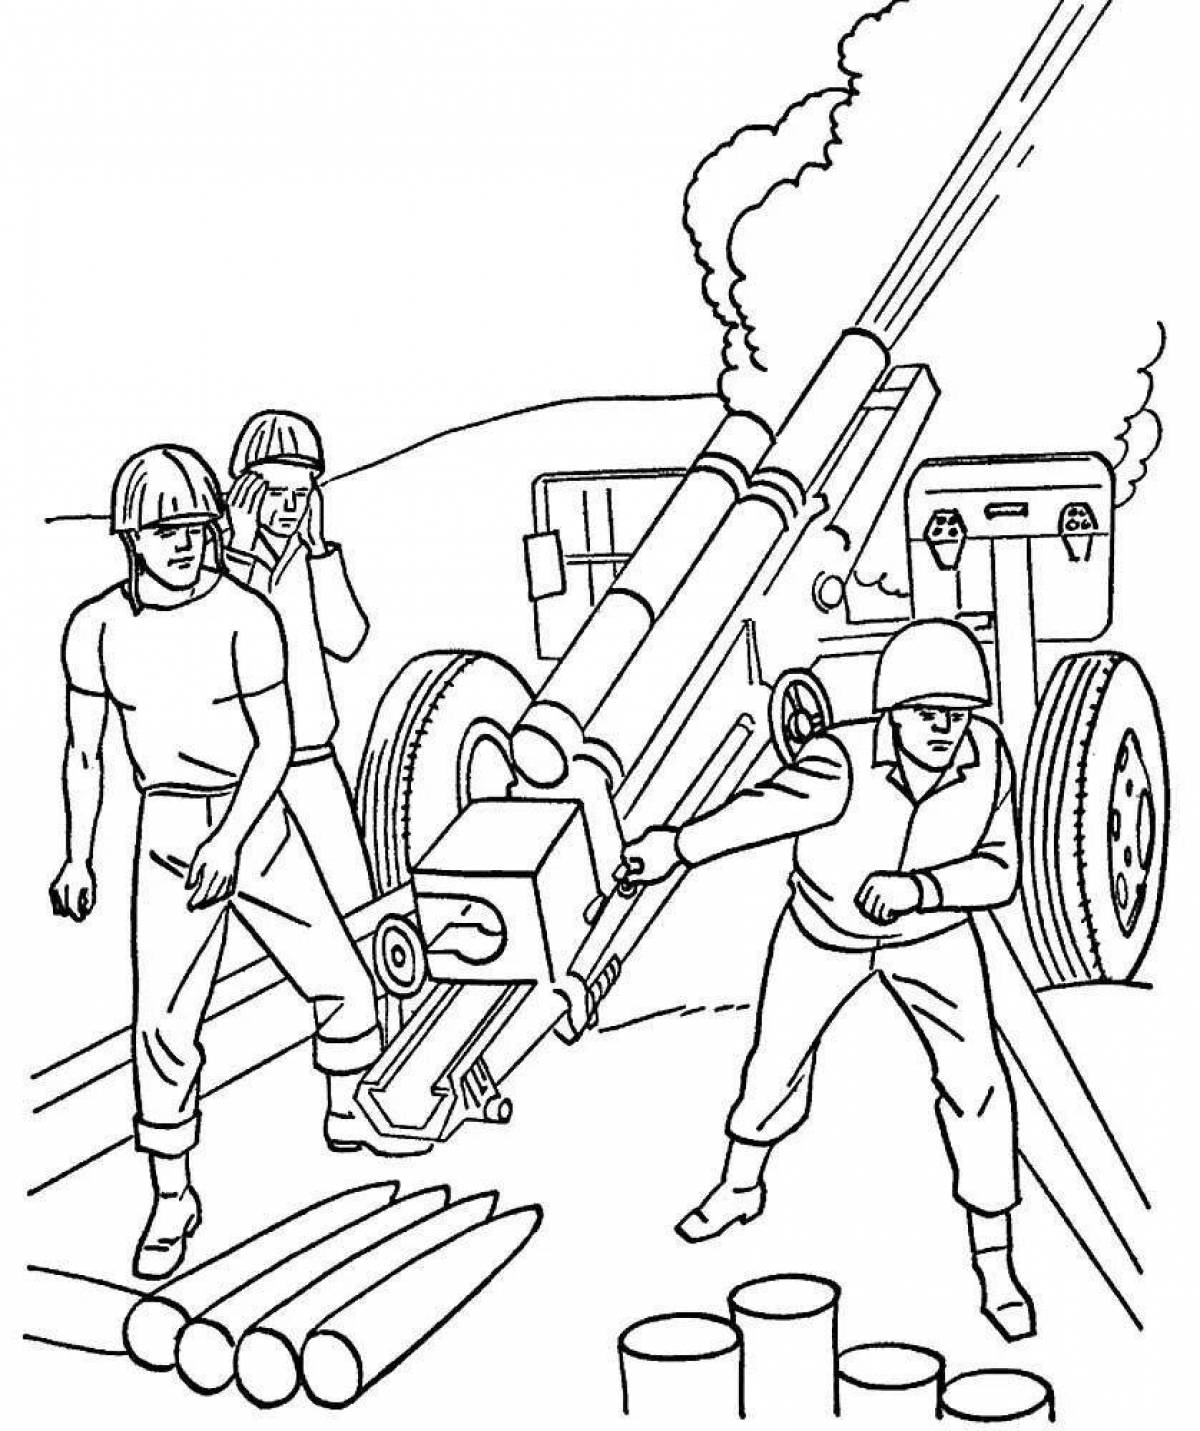 Chaotic war coloring page